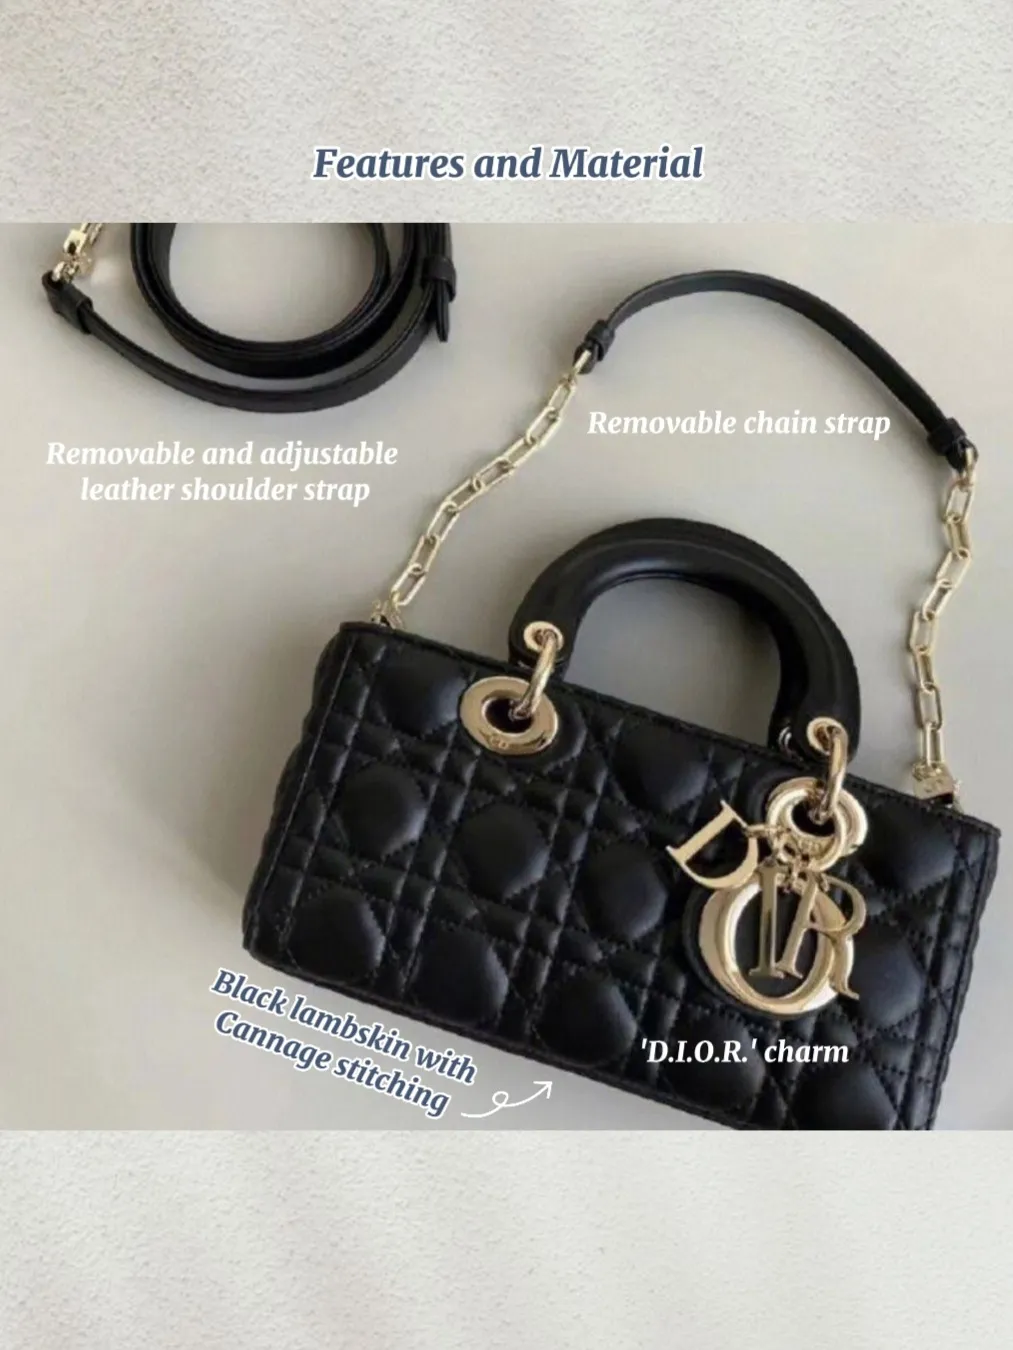 Small Lady Dior bag what fits inside 